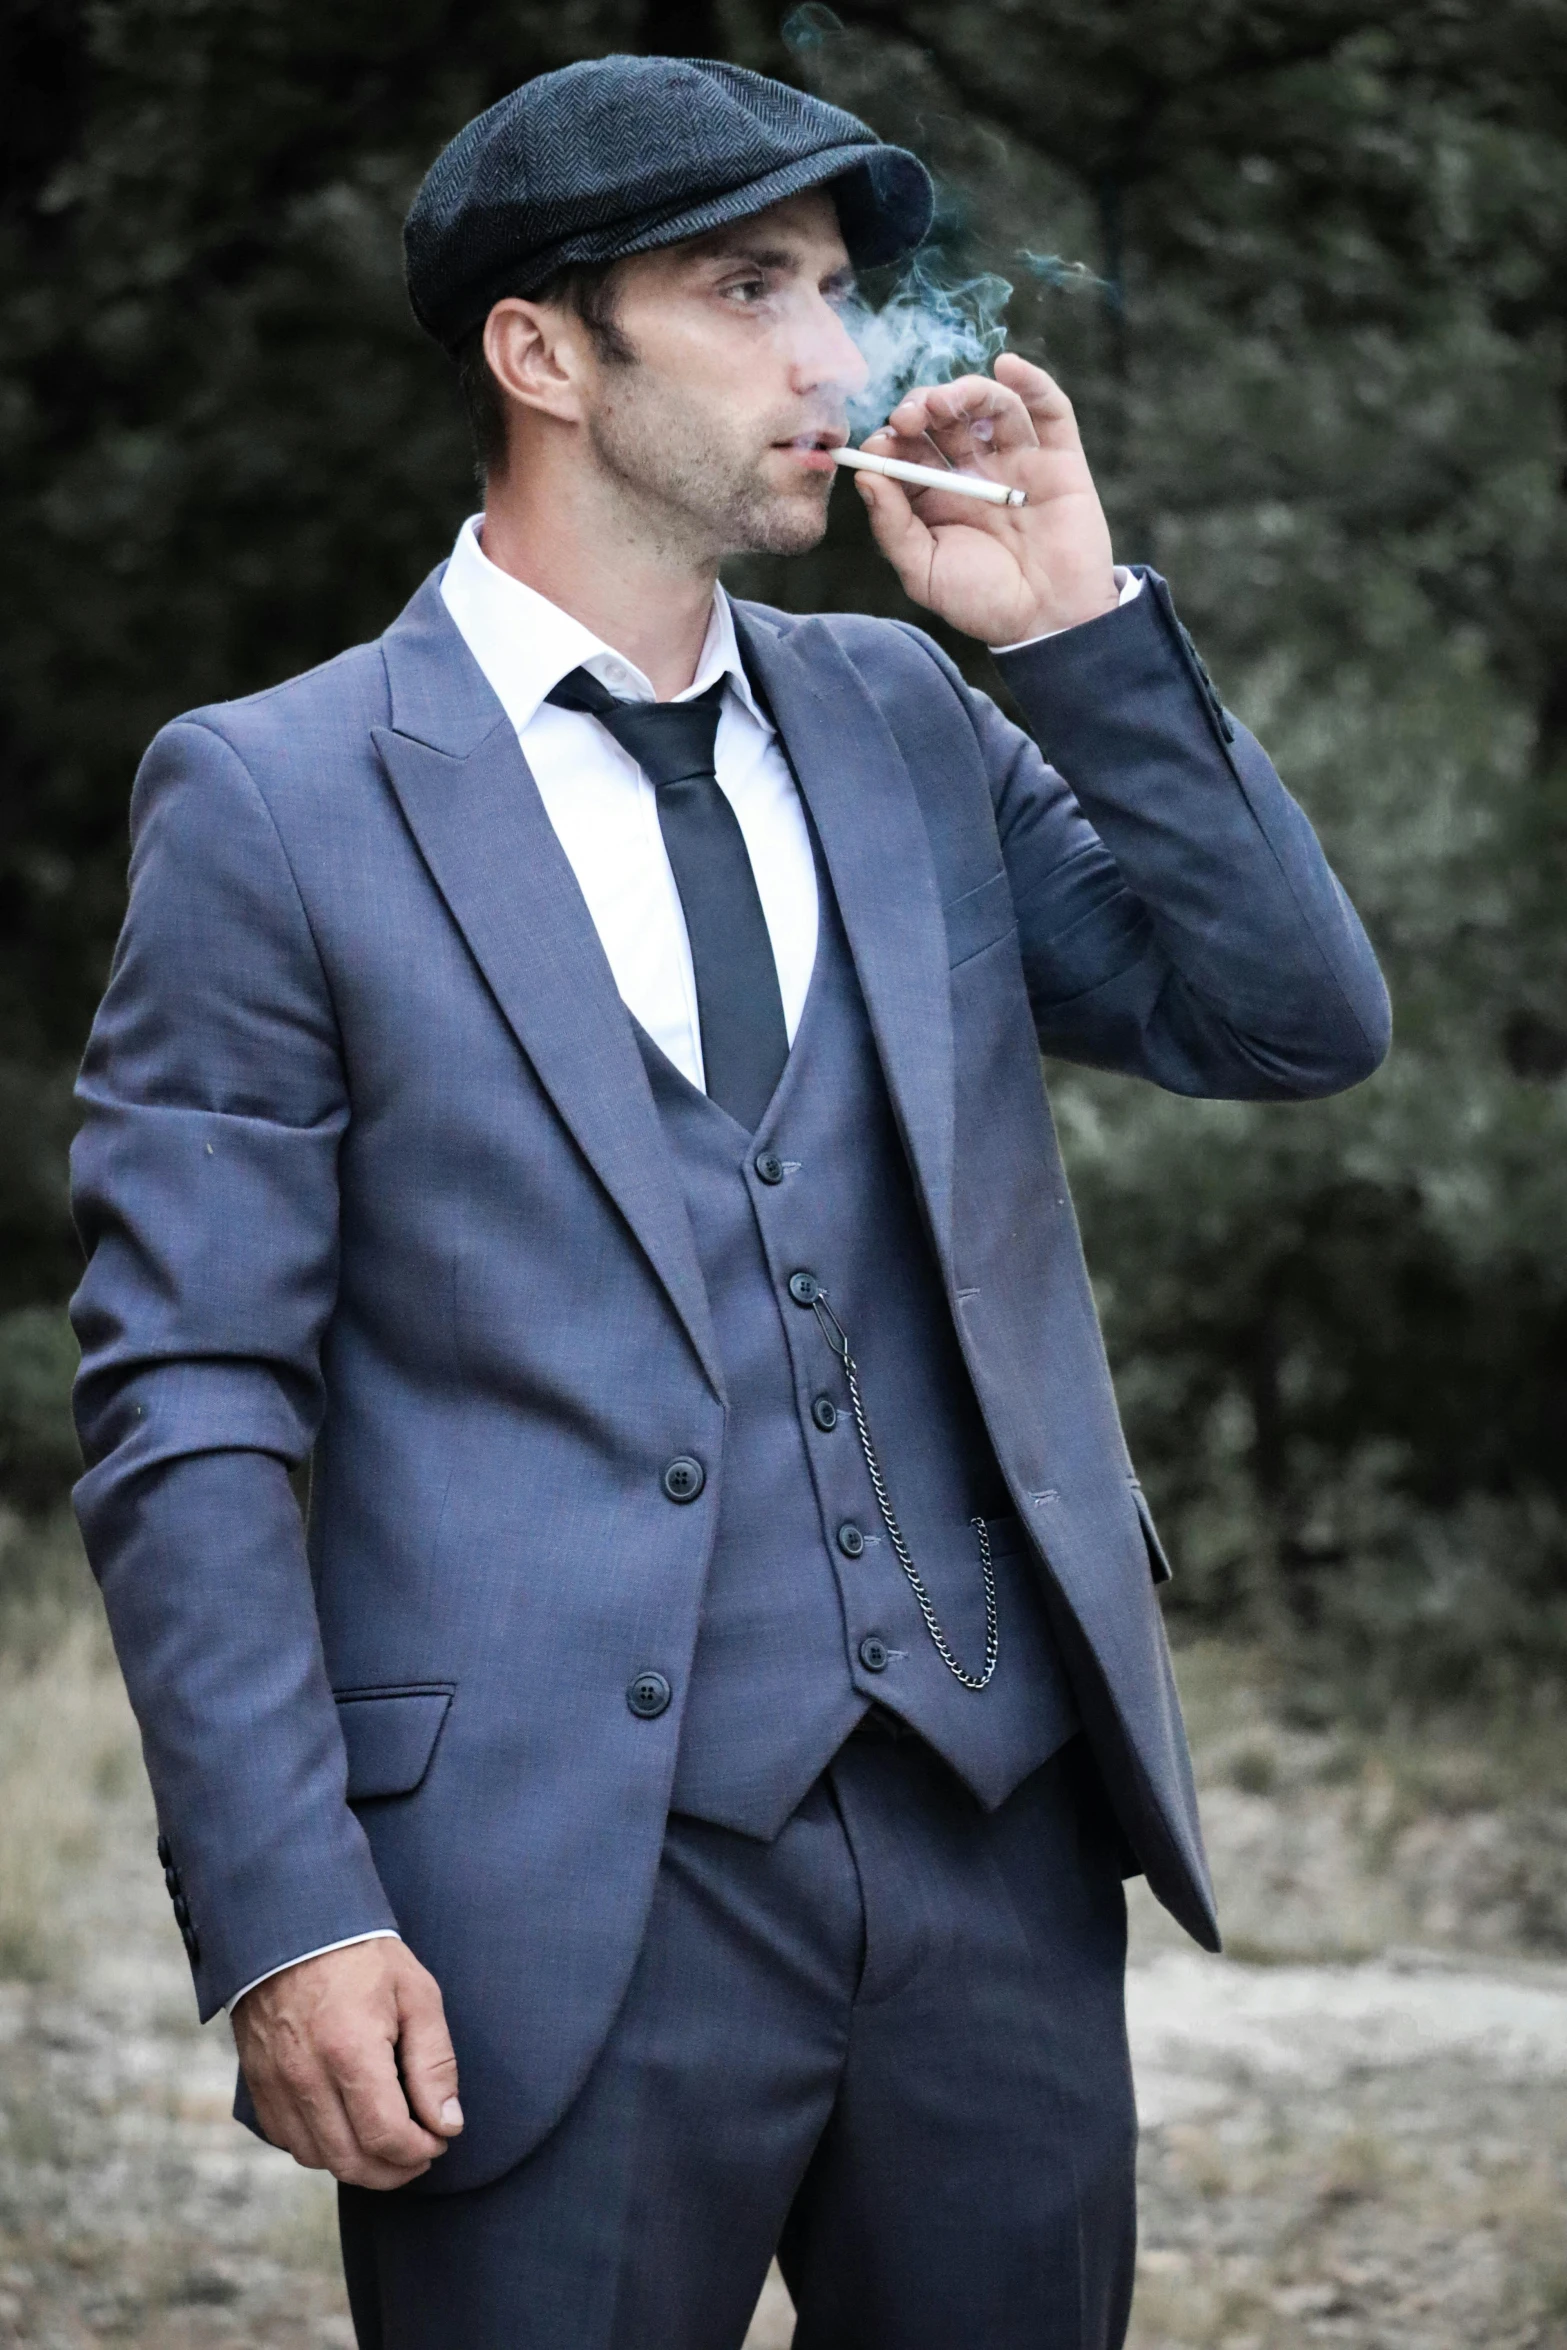 a man in a suit smoking while wearing a hat